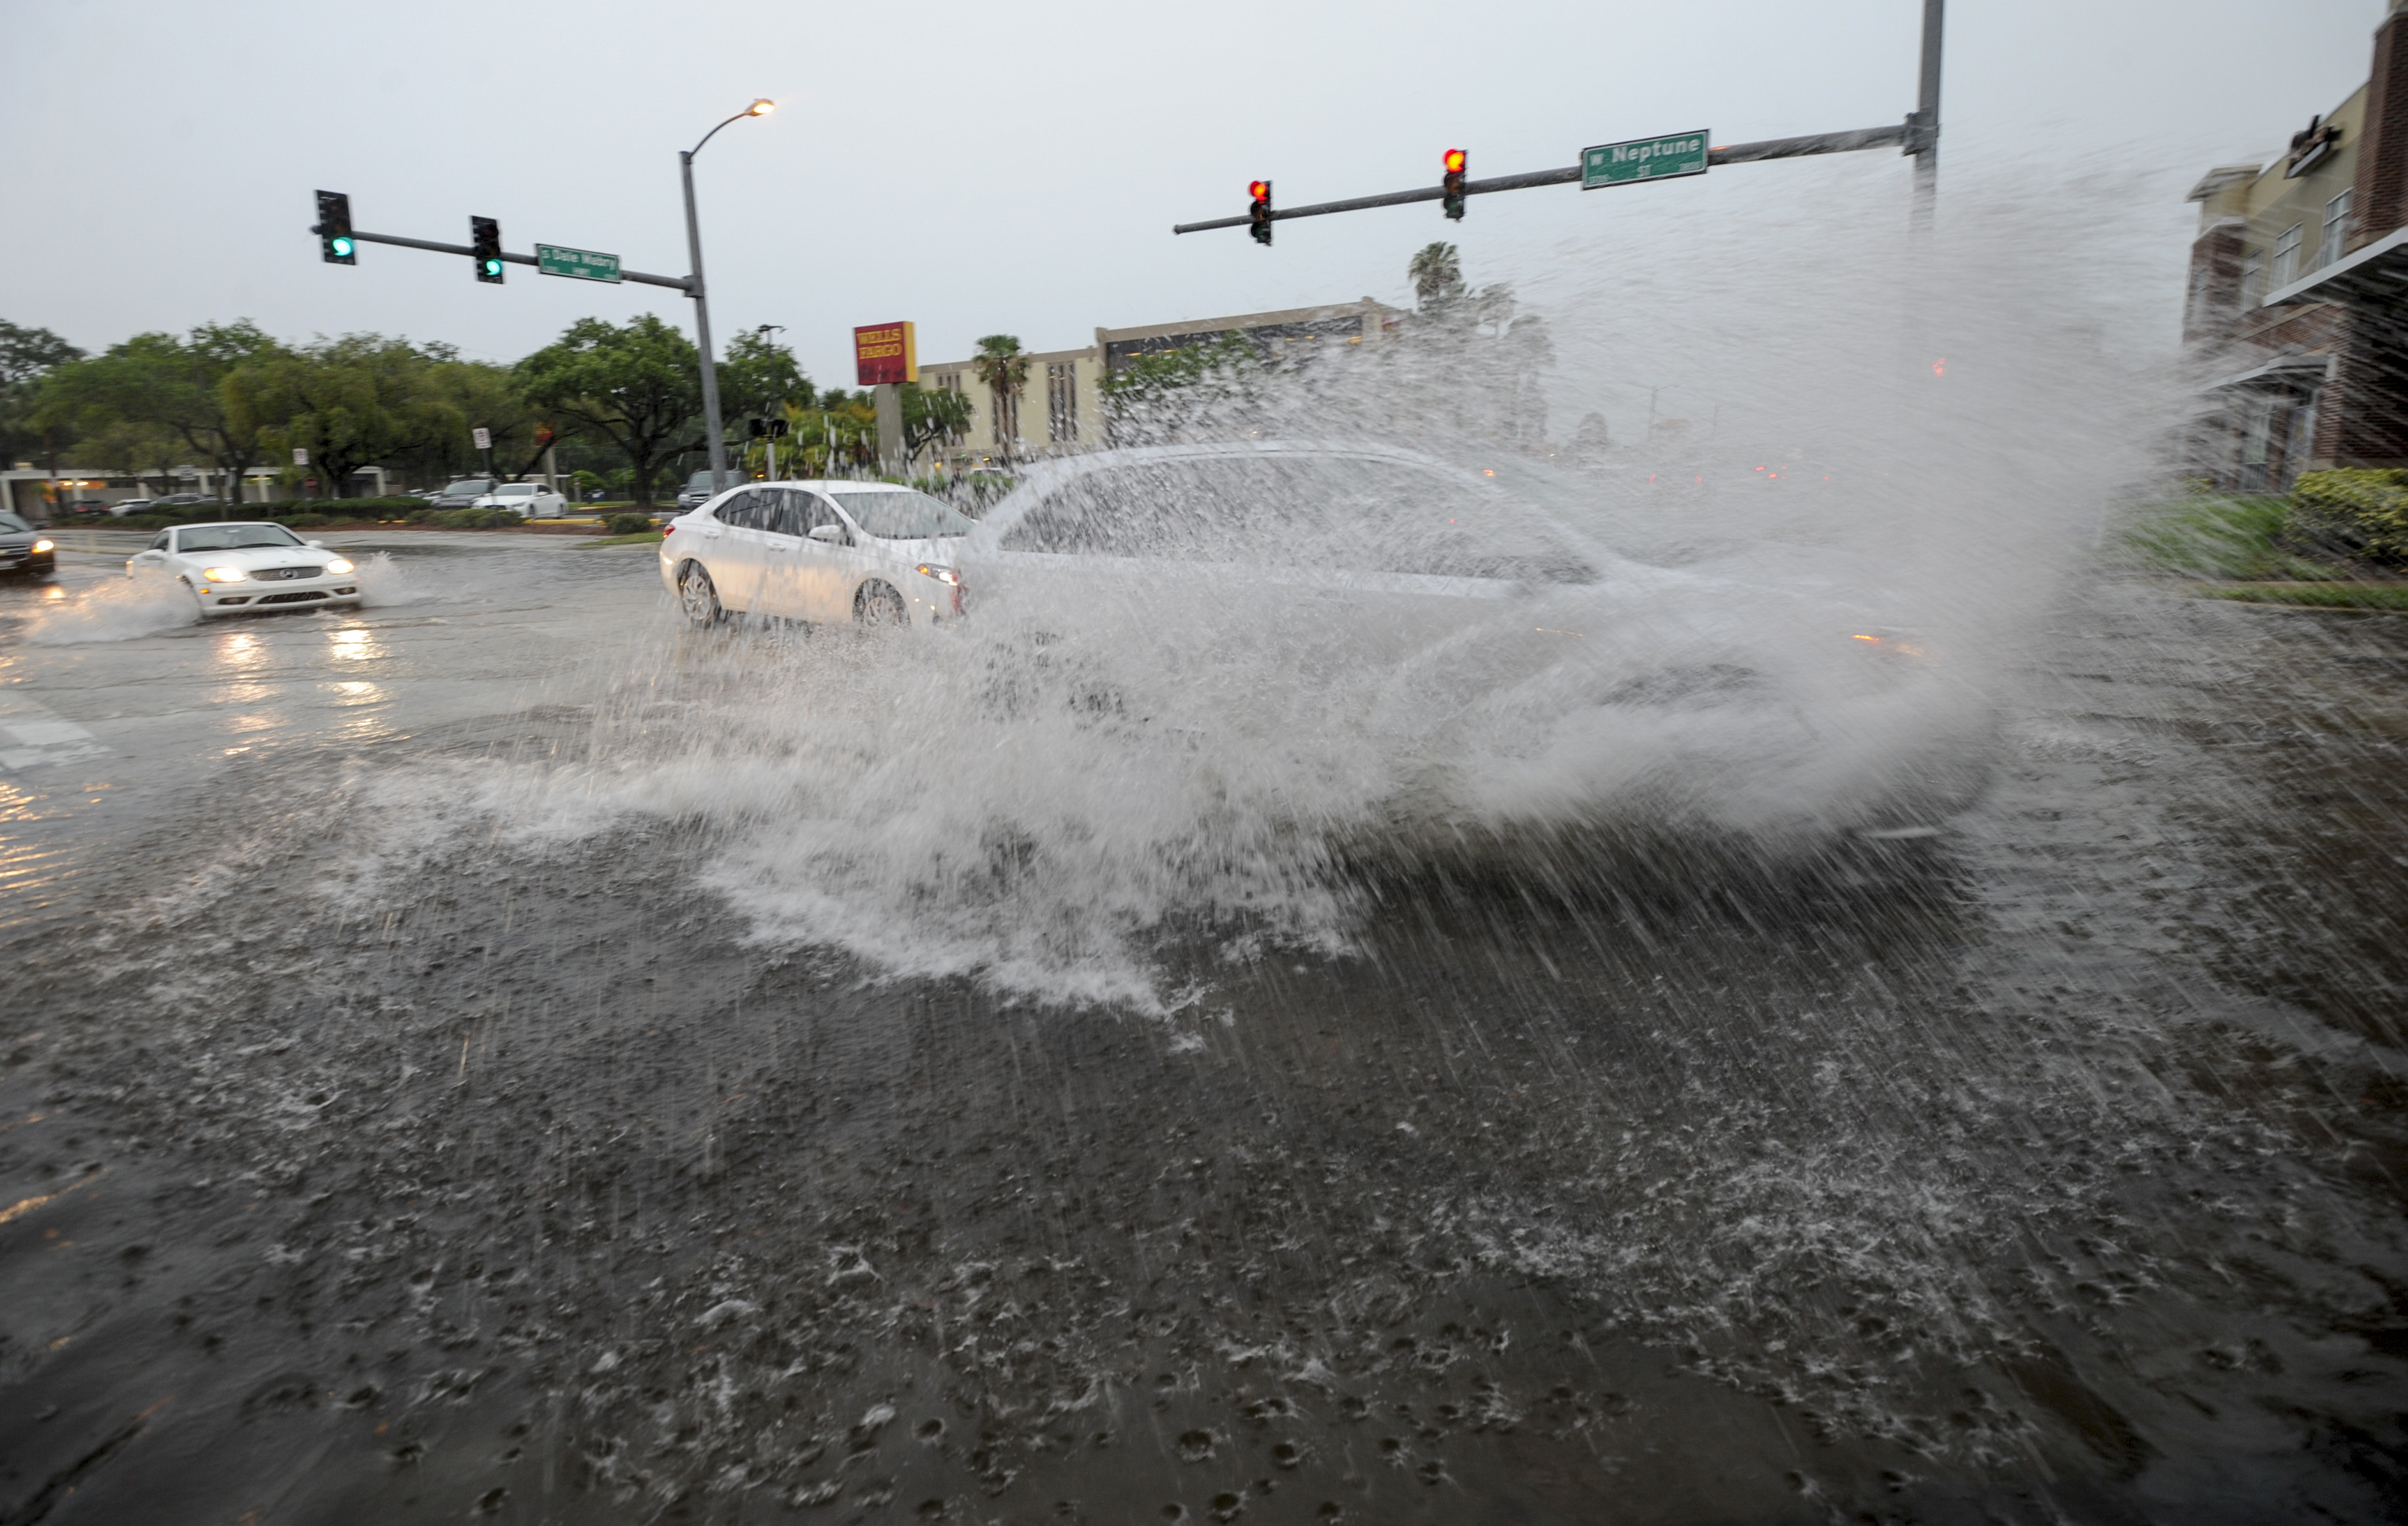 A driver speeds through the flooded intersection of Dale Mabry Highway and Neptune Street Wednesday, June 7, 2017, in Tampa. Heavy rains that have hit South Florida the past couple of days. (Chris Urso/Tampa Bay Times via AP)